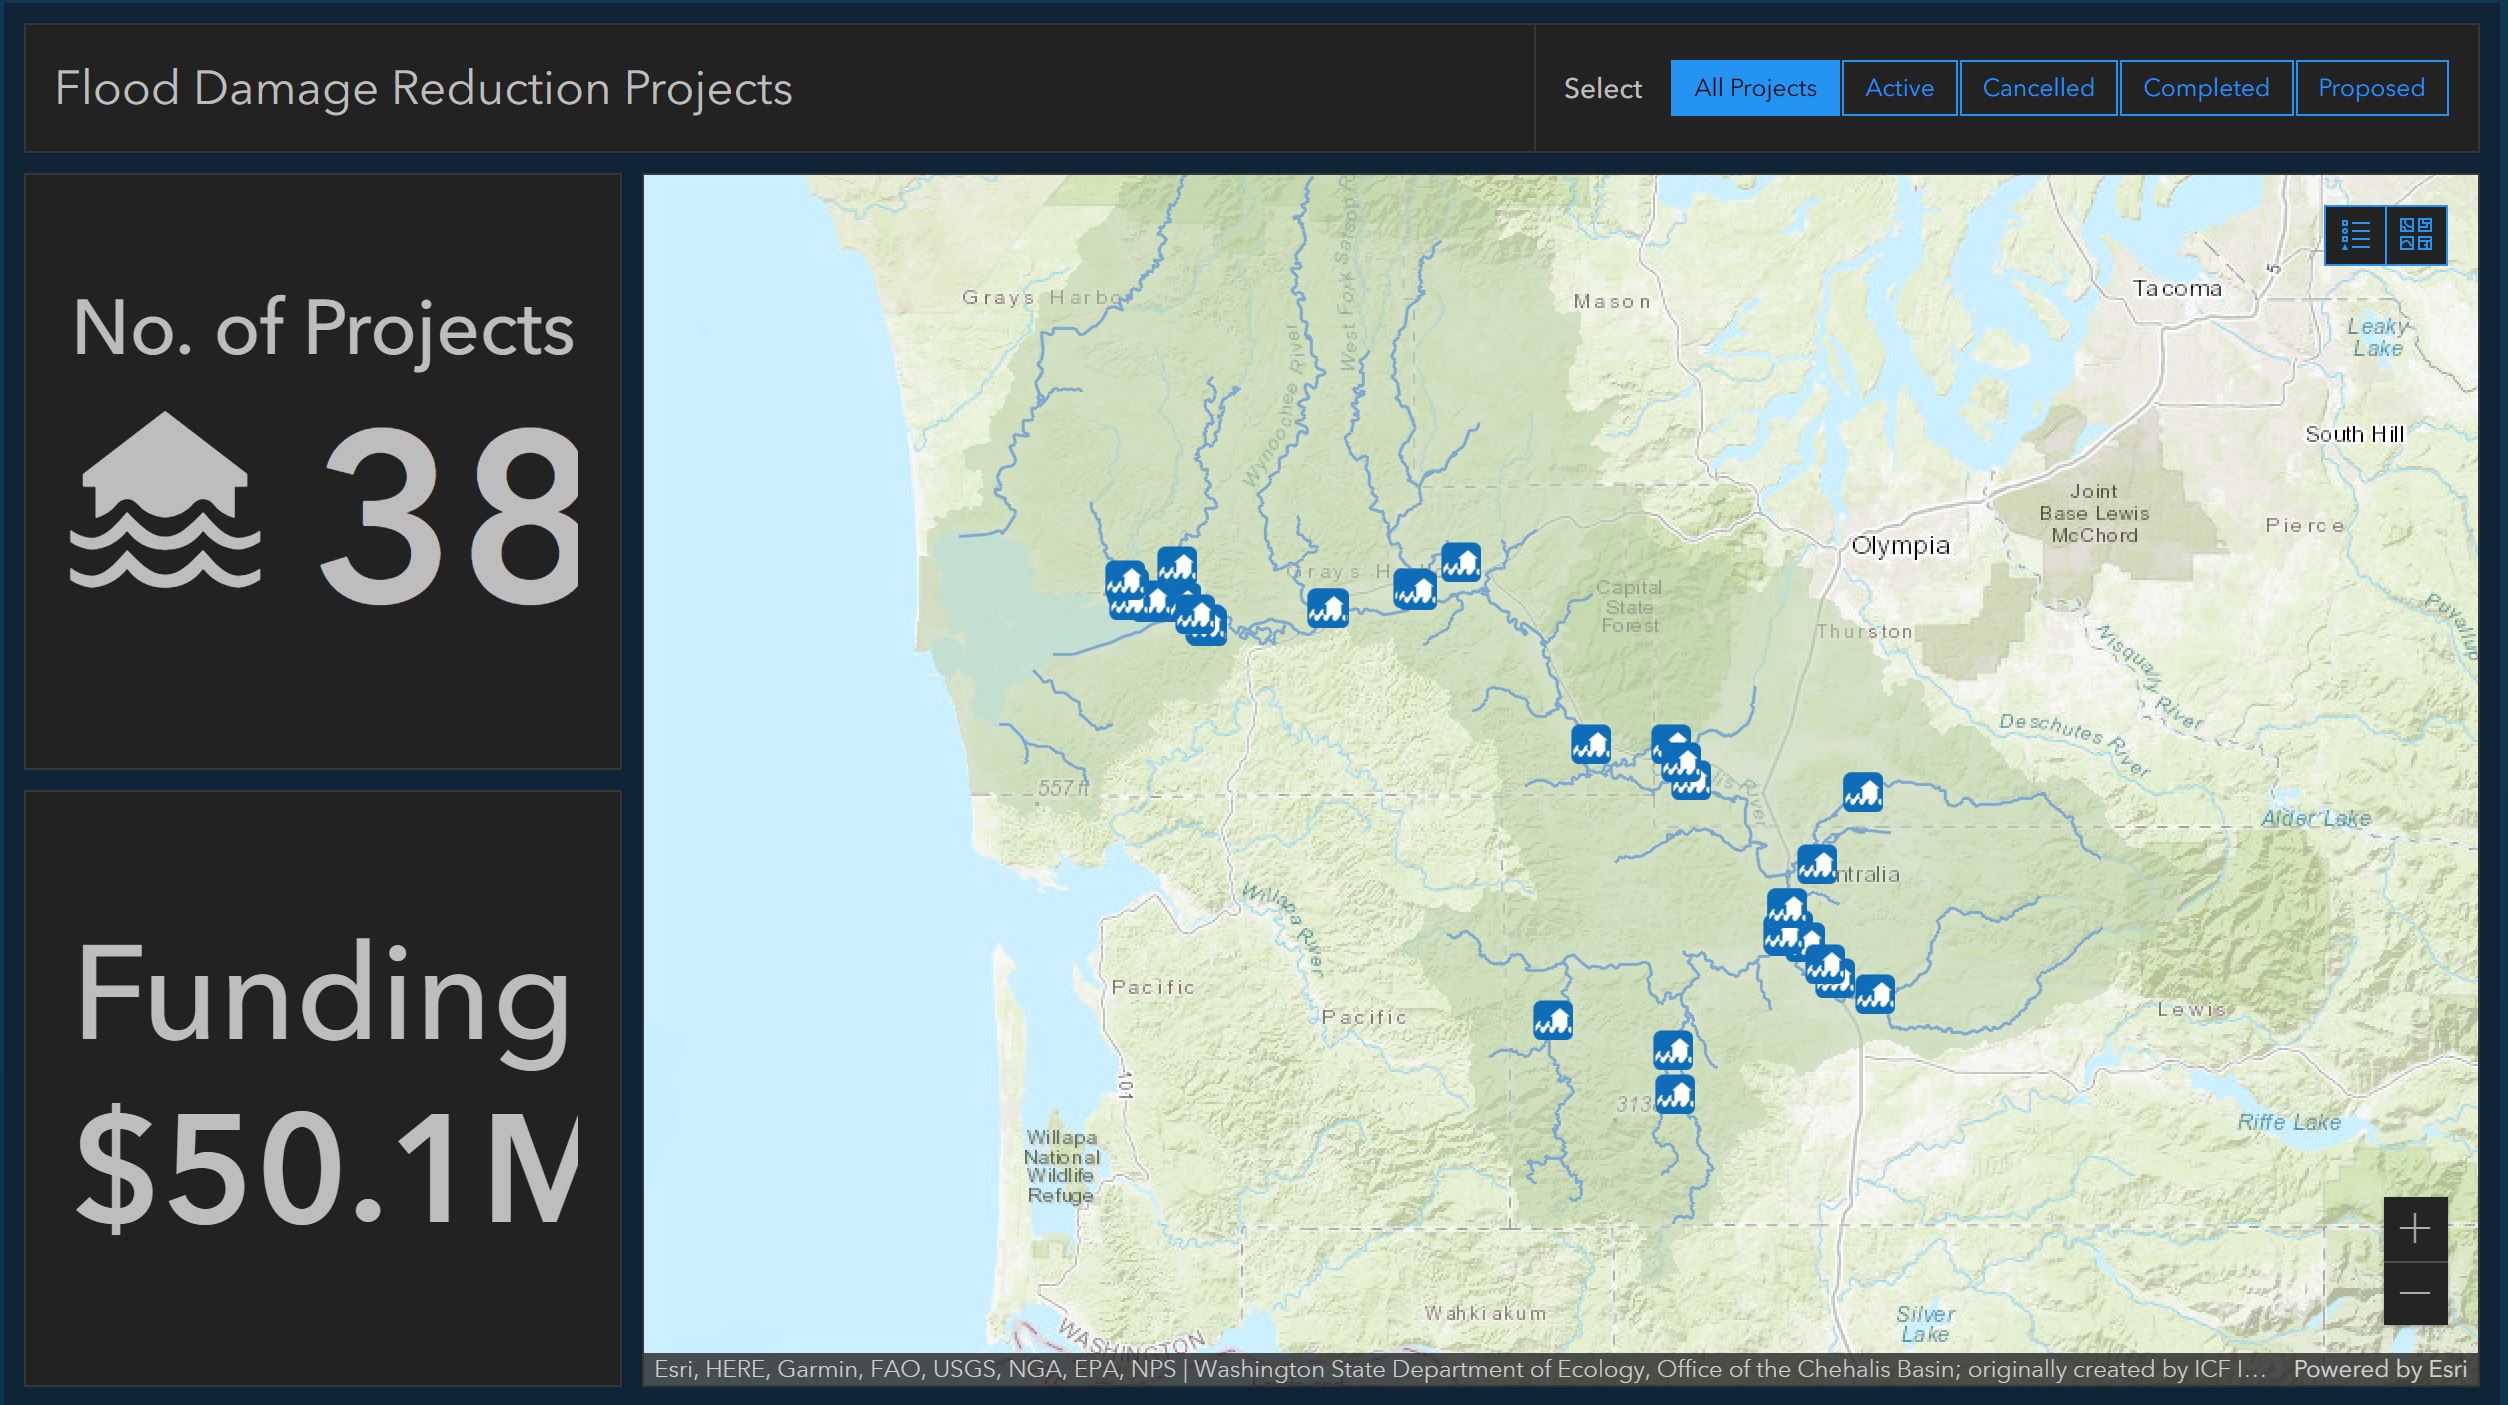 Screenshot of storymap showing 38 projects, $50.1 million in funding, and the locations of projects within the Chehalis Basin